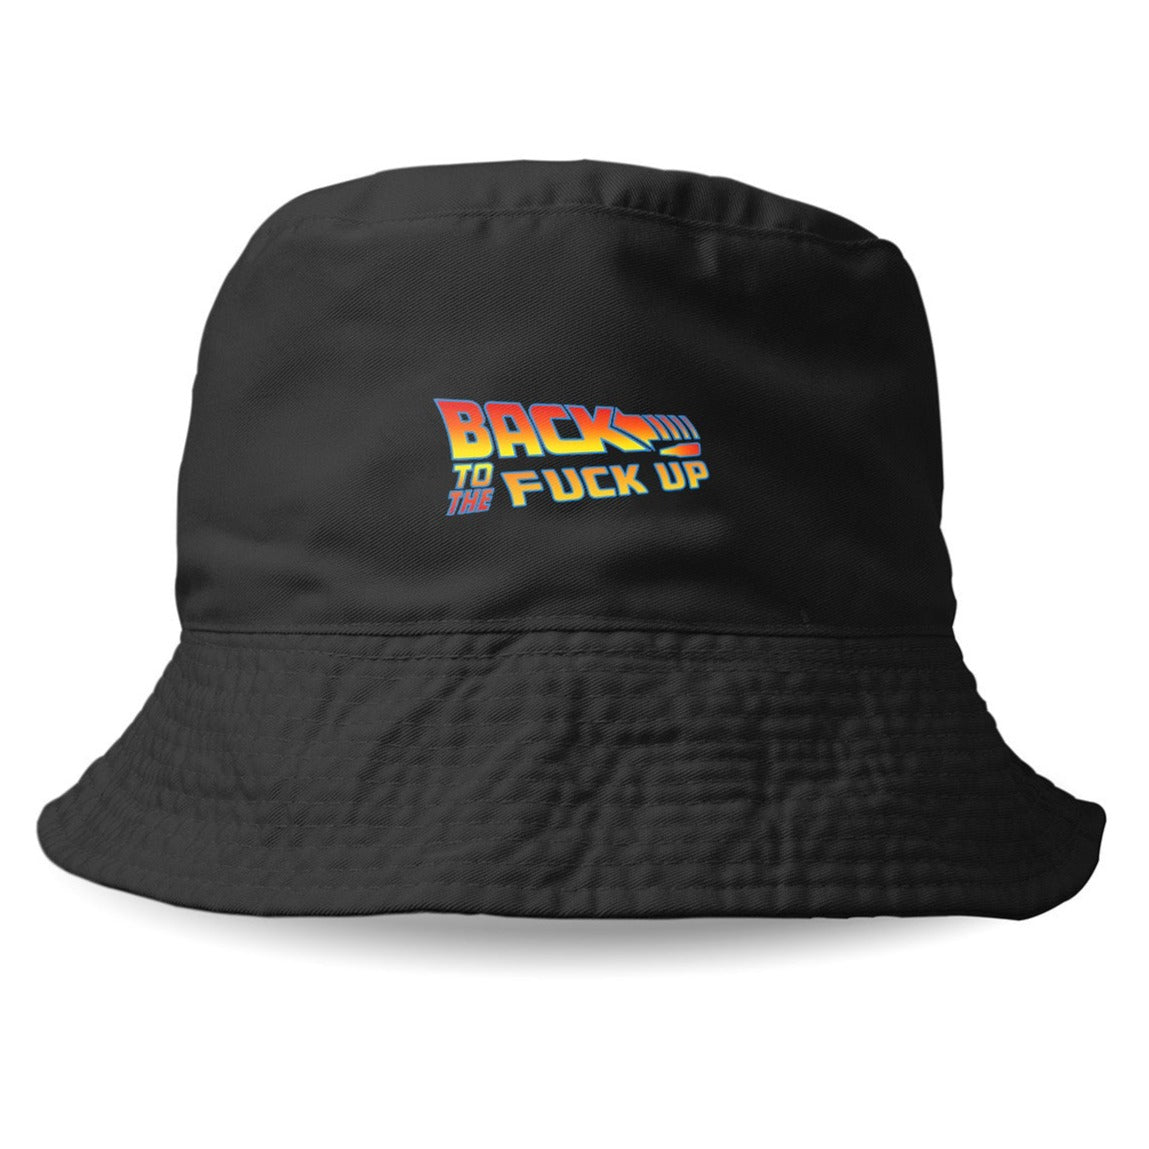 BACK TO THE - Bucket Hat